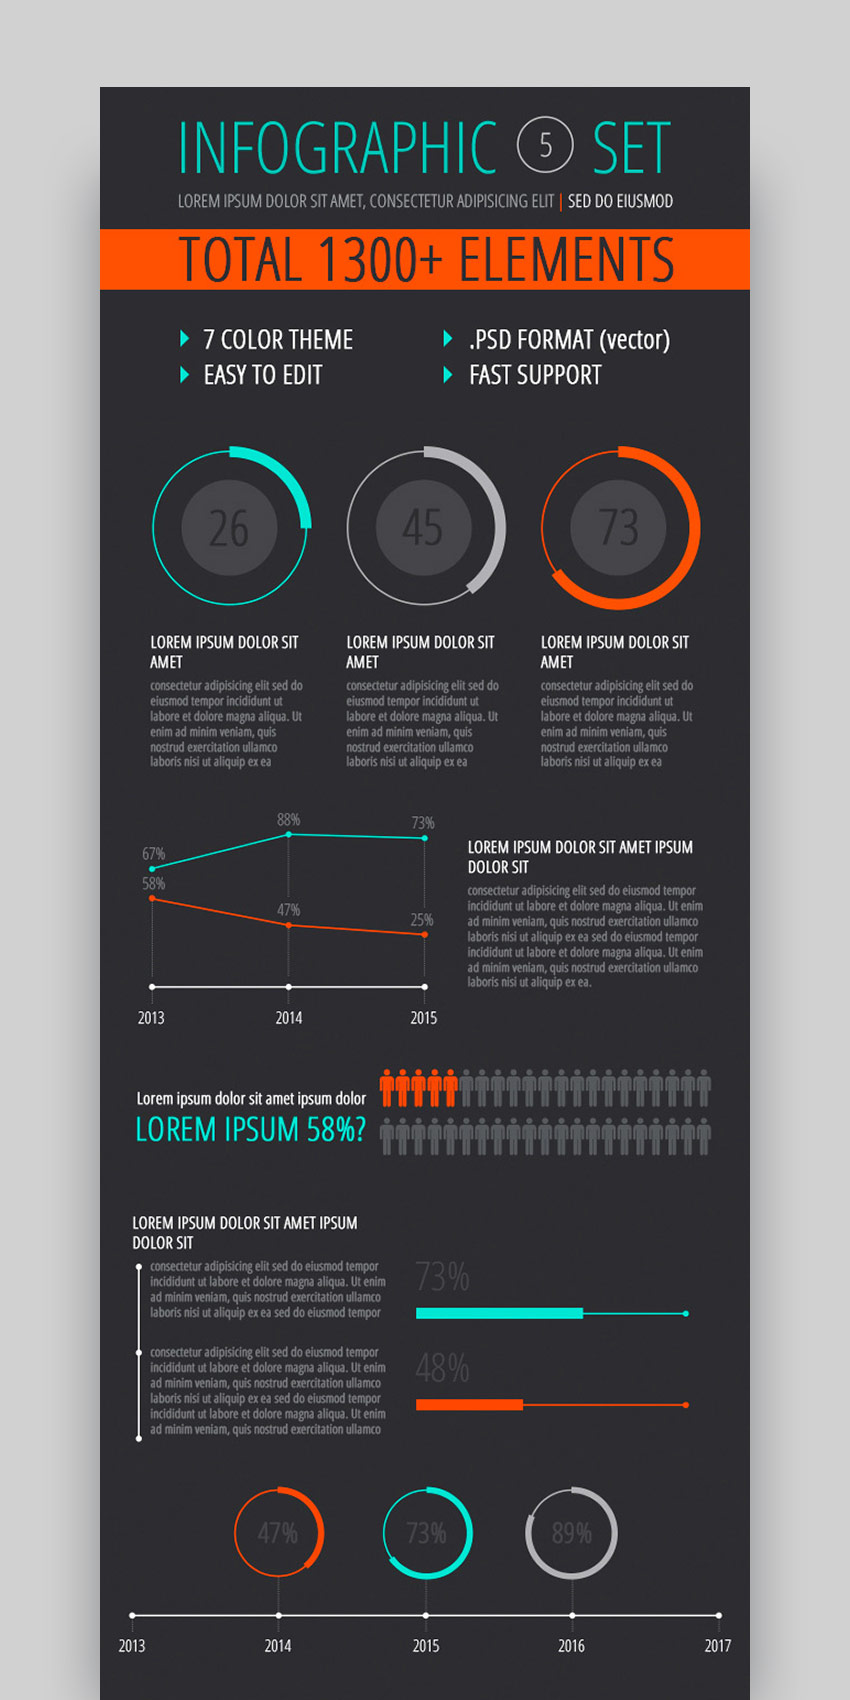 How to Design an Infographic